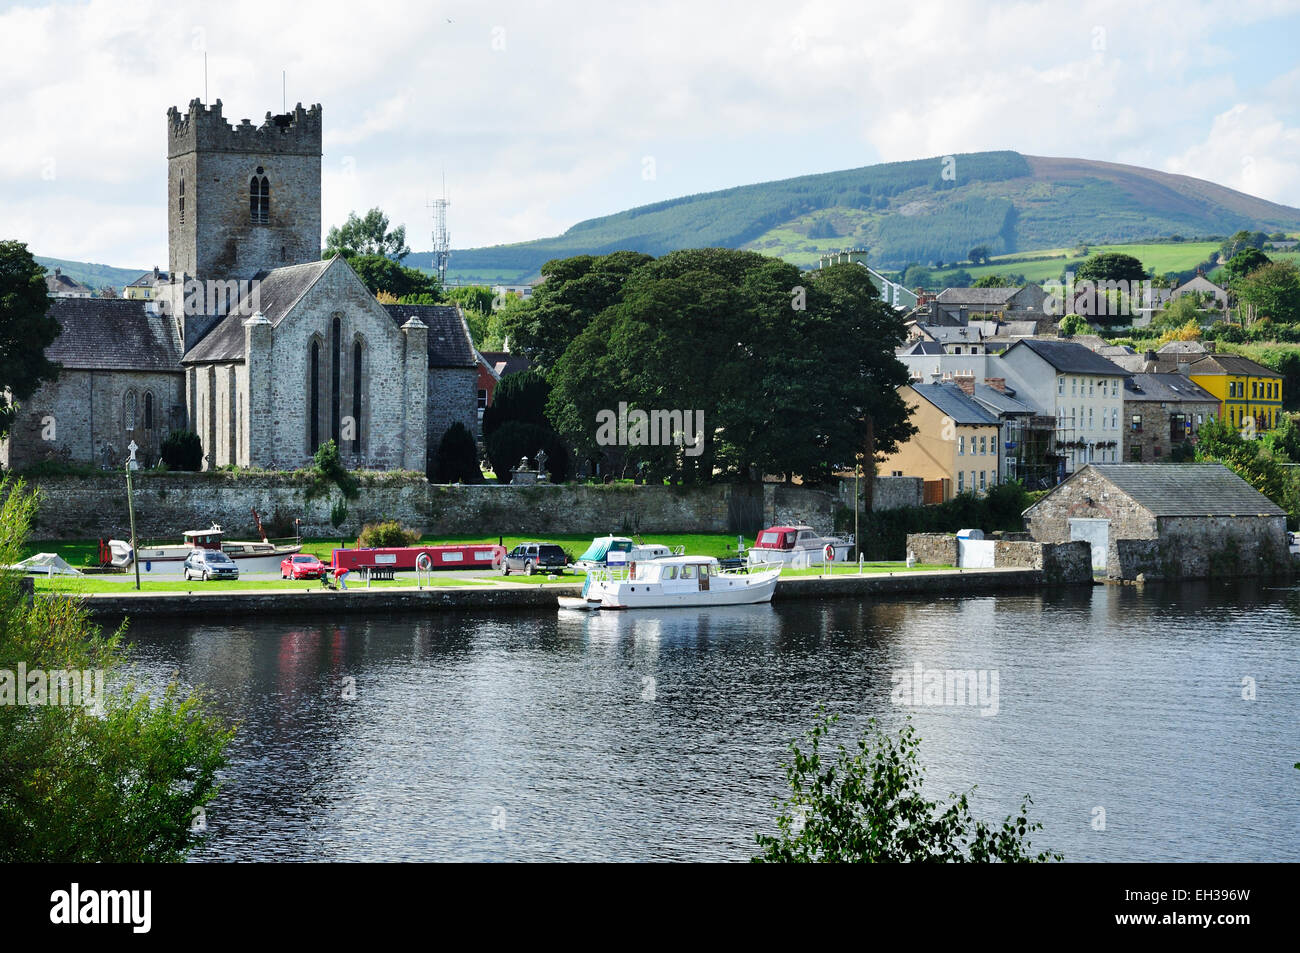 Ballina is a town in north County Mayo, Ireland. Stock Photo